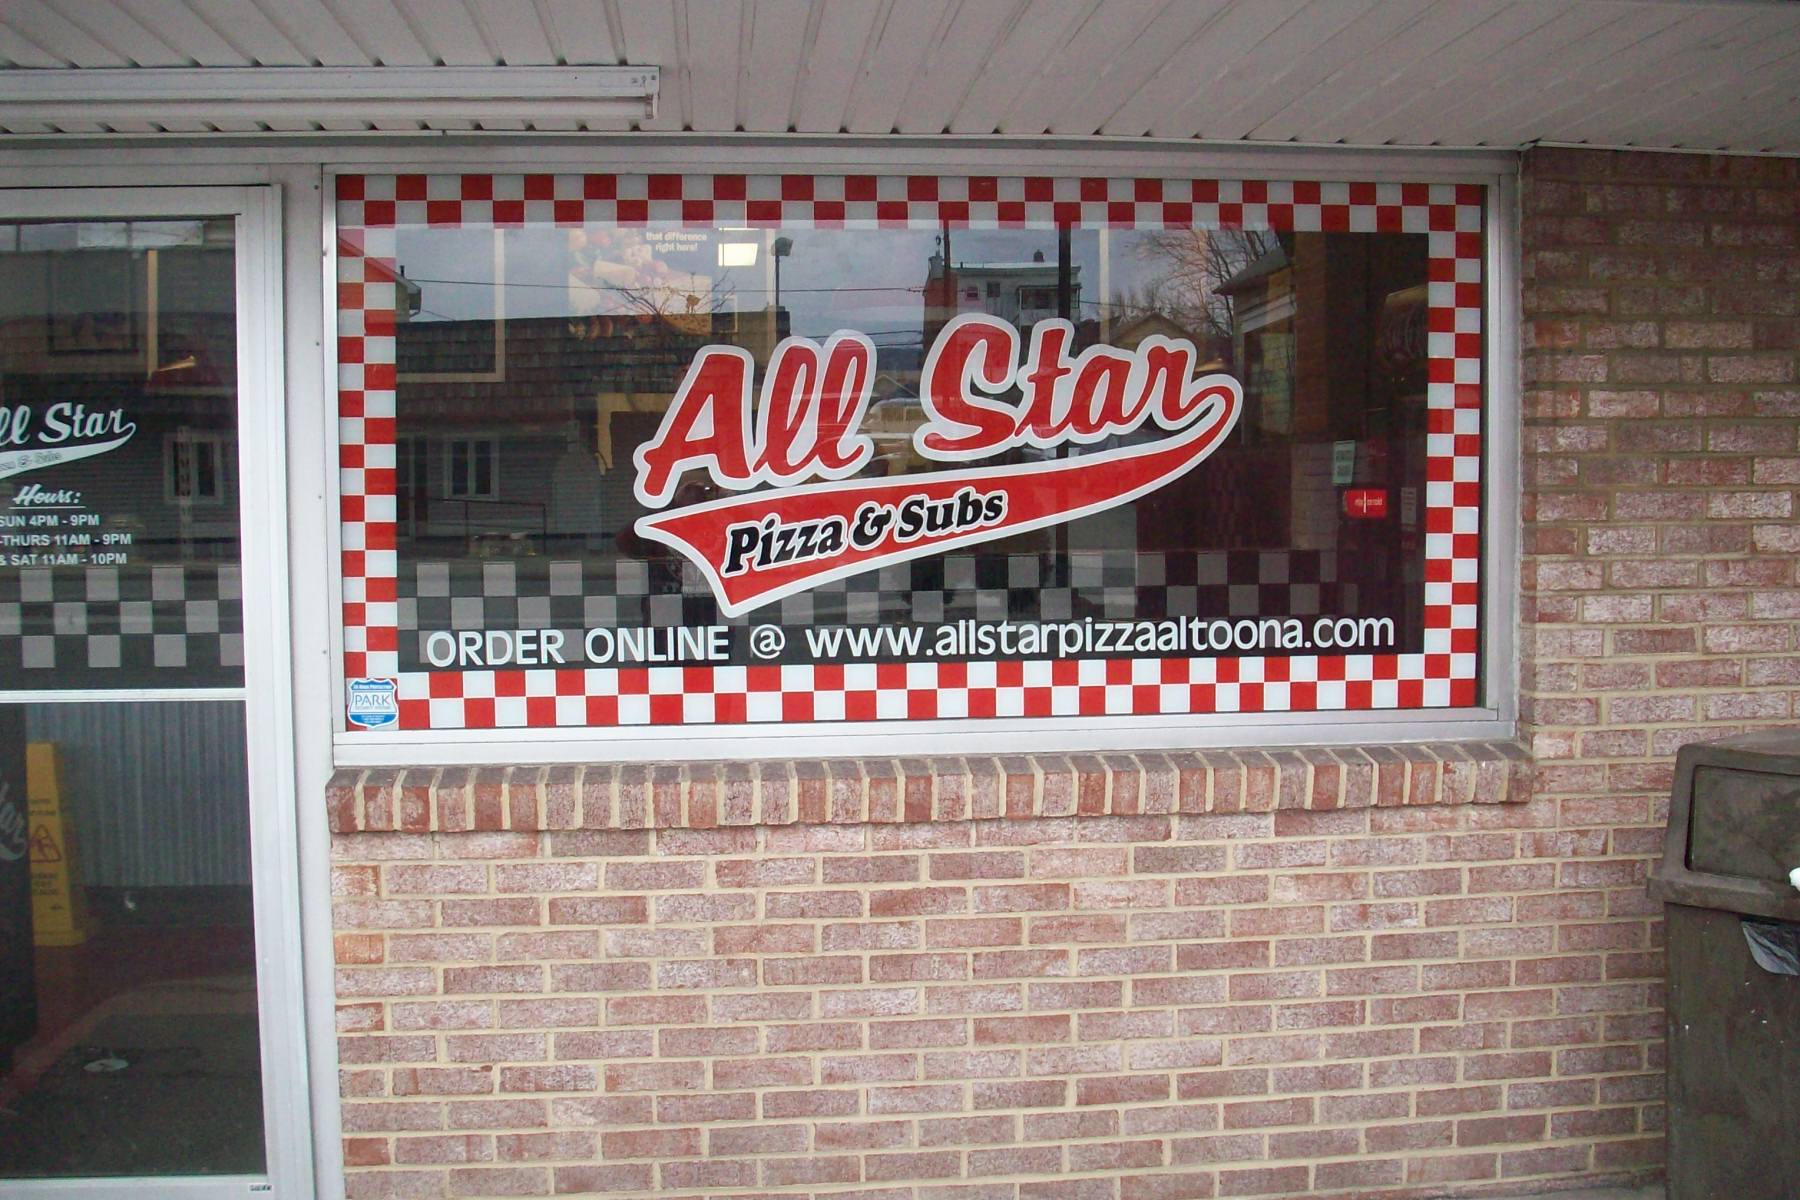 All Star Pizza and Subs Altoona Pa - All Star Pizza and Subs Newry Pa -